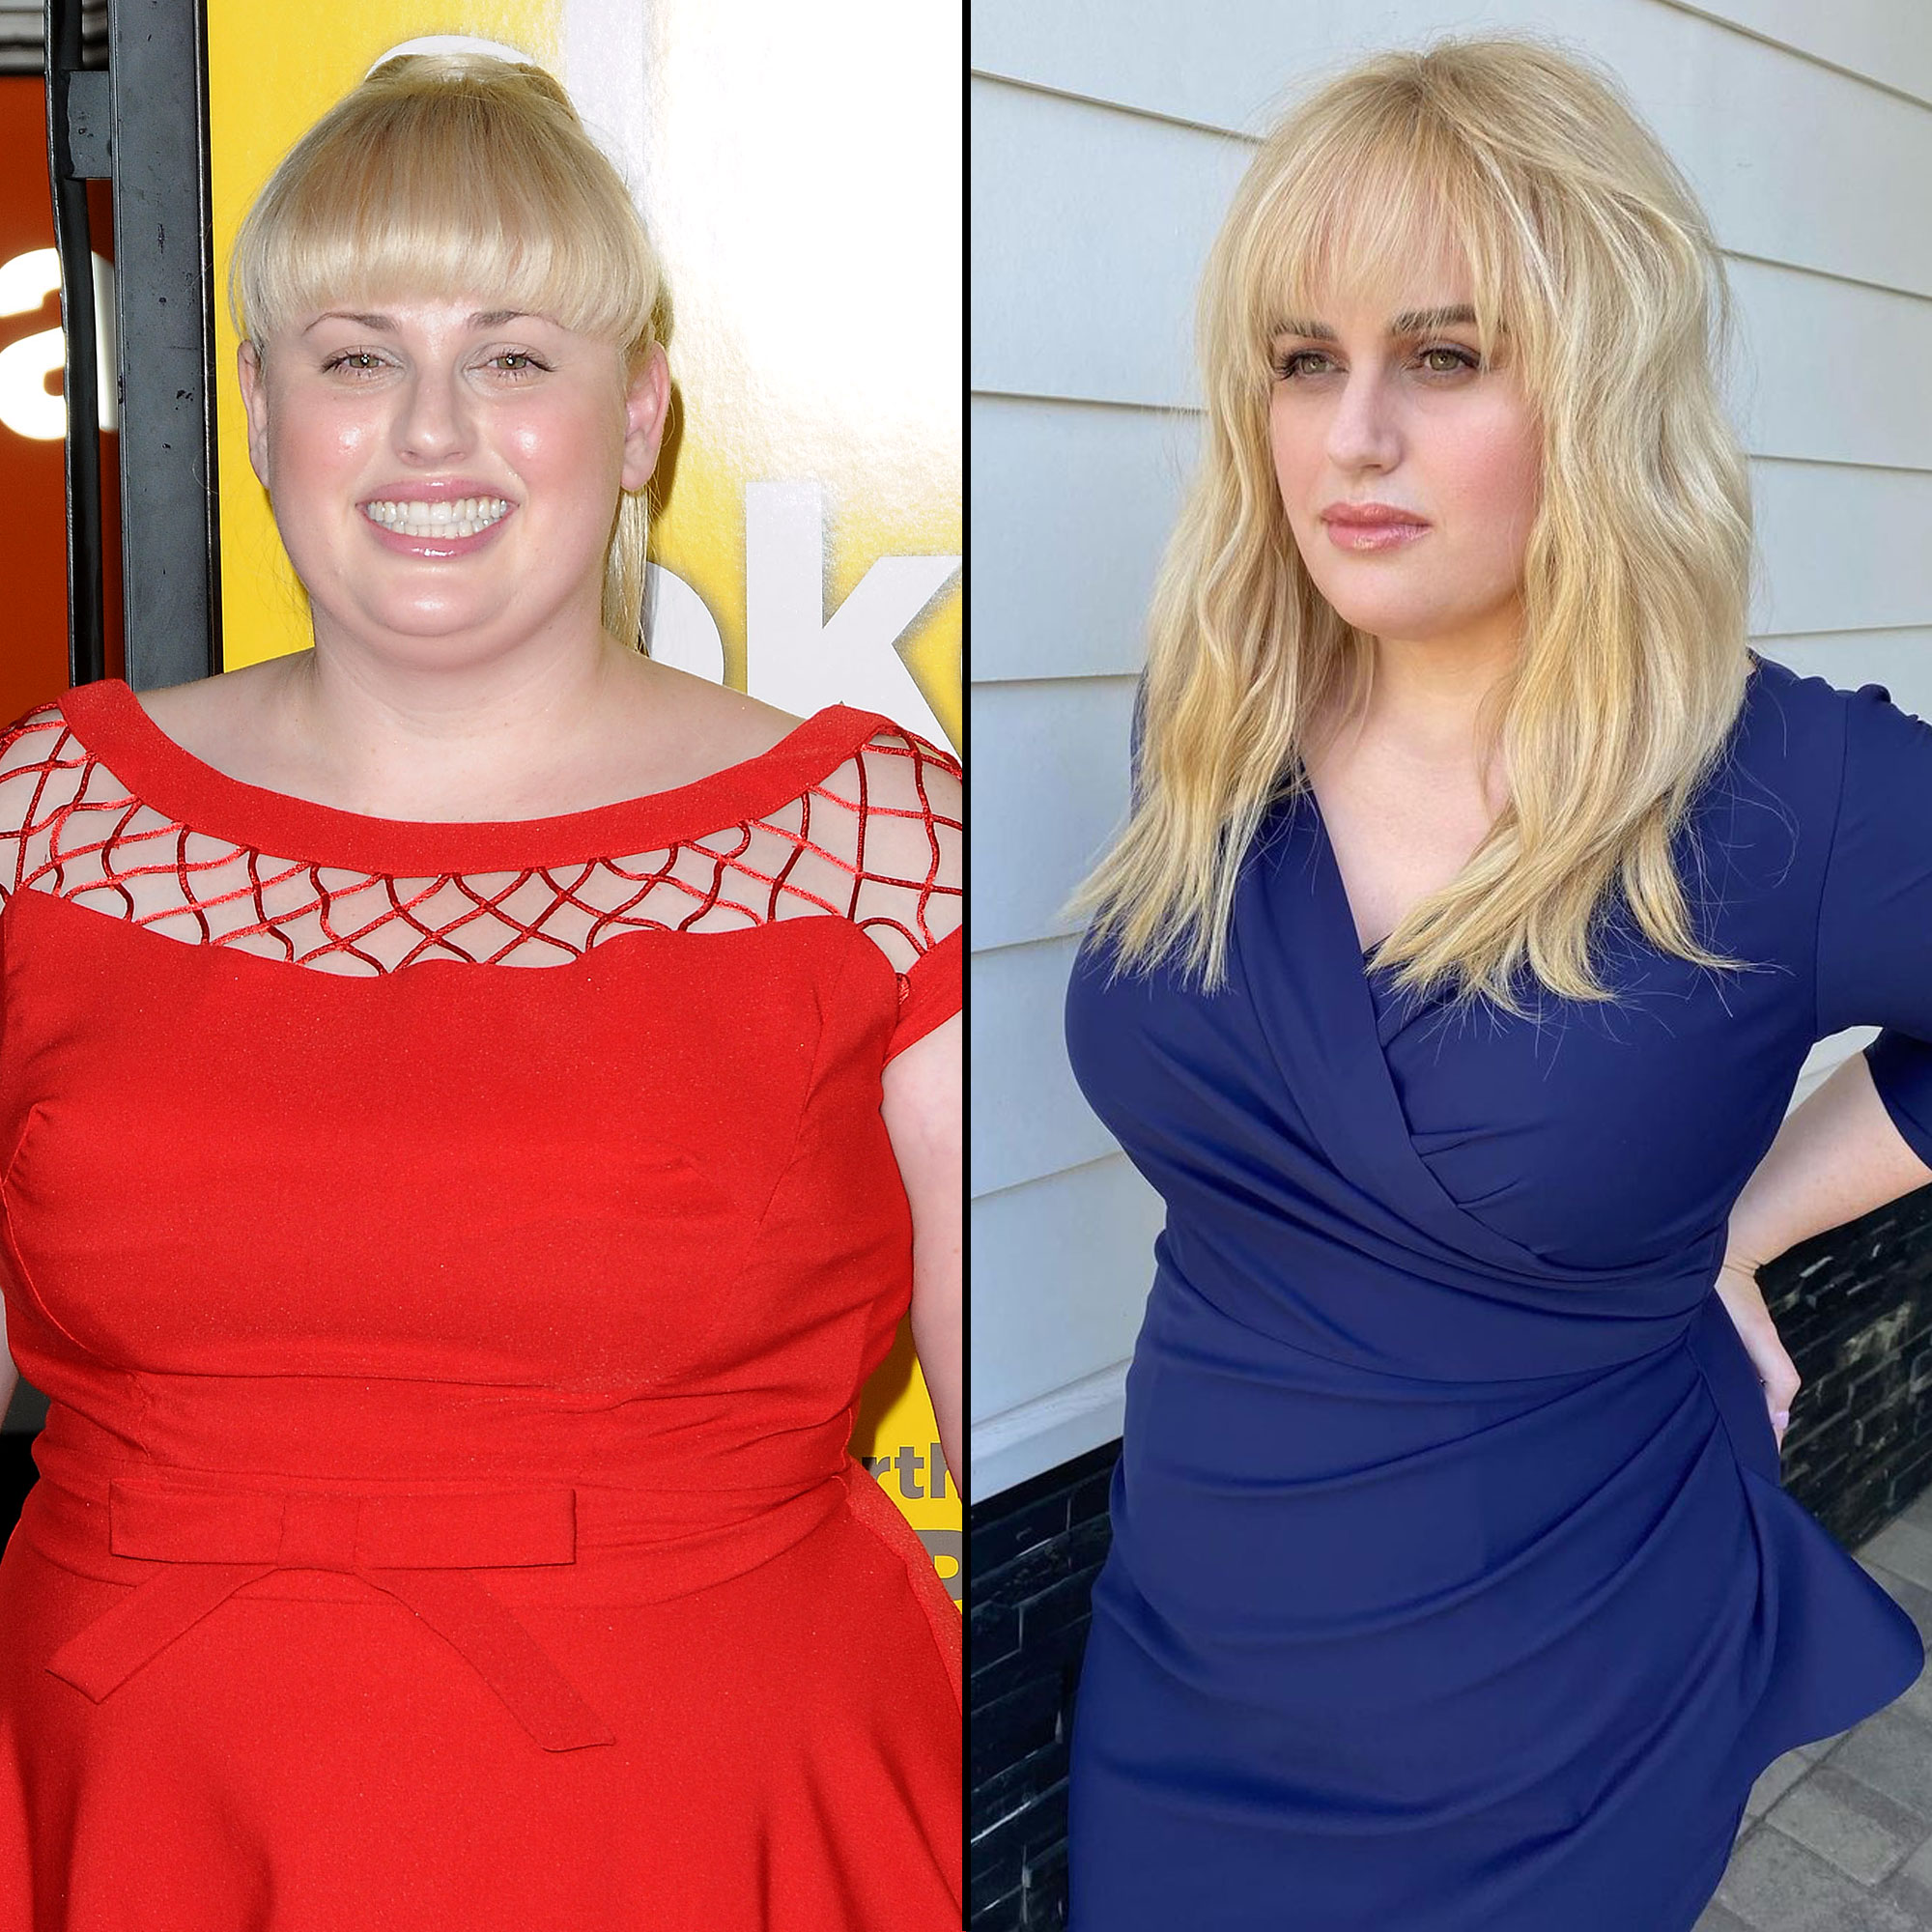 Rebel Wilson's Diet Amid Weight Loss Is a 'Healthy Balance'